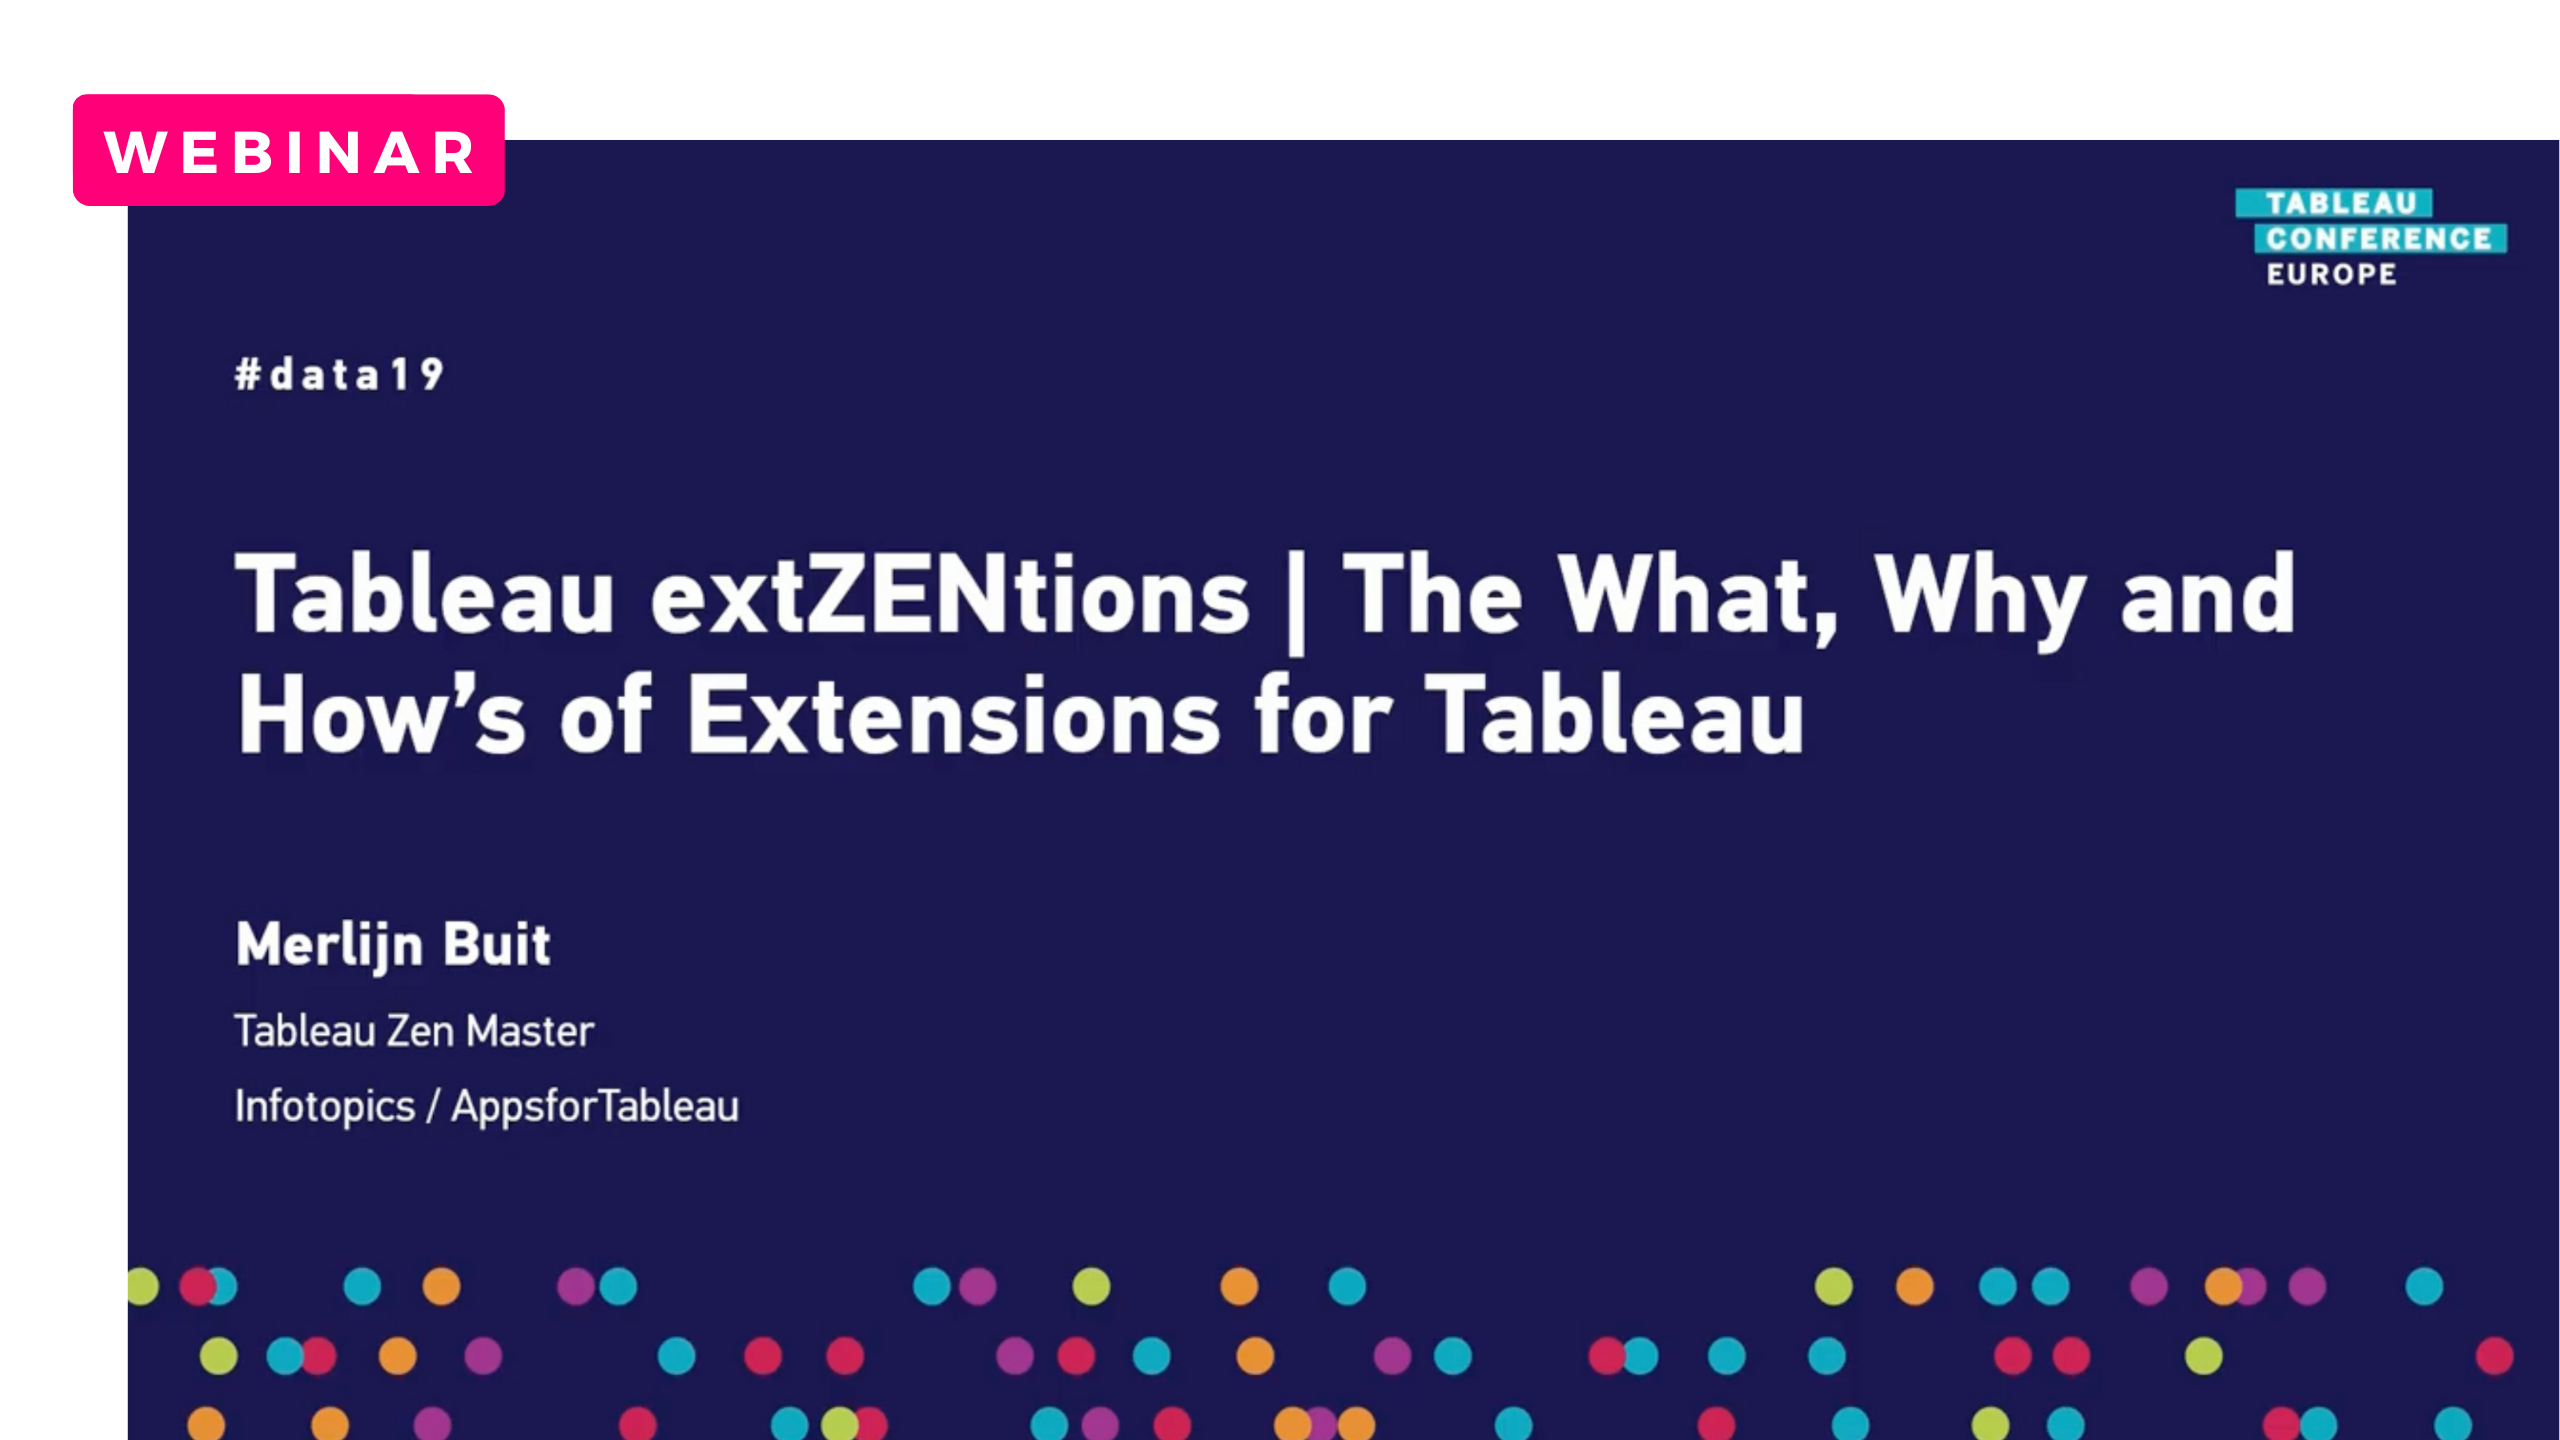 Security what, why and how’s of extensions for tableau